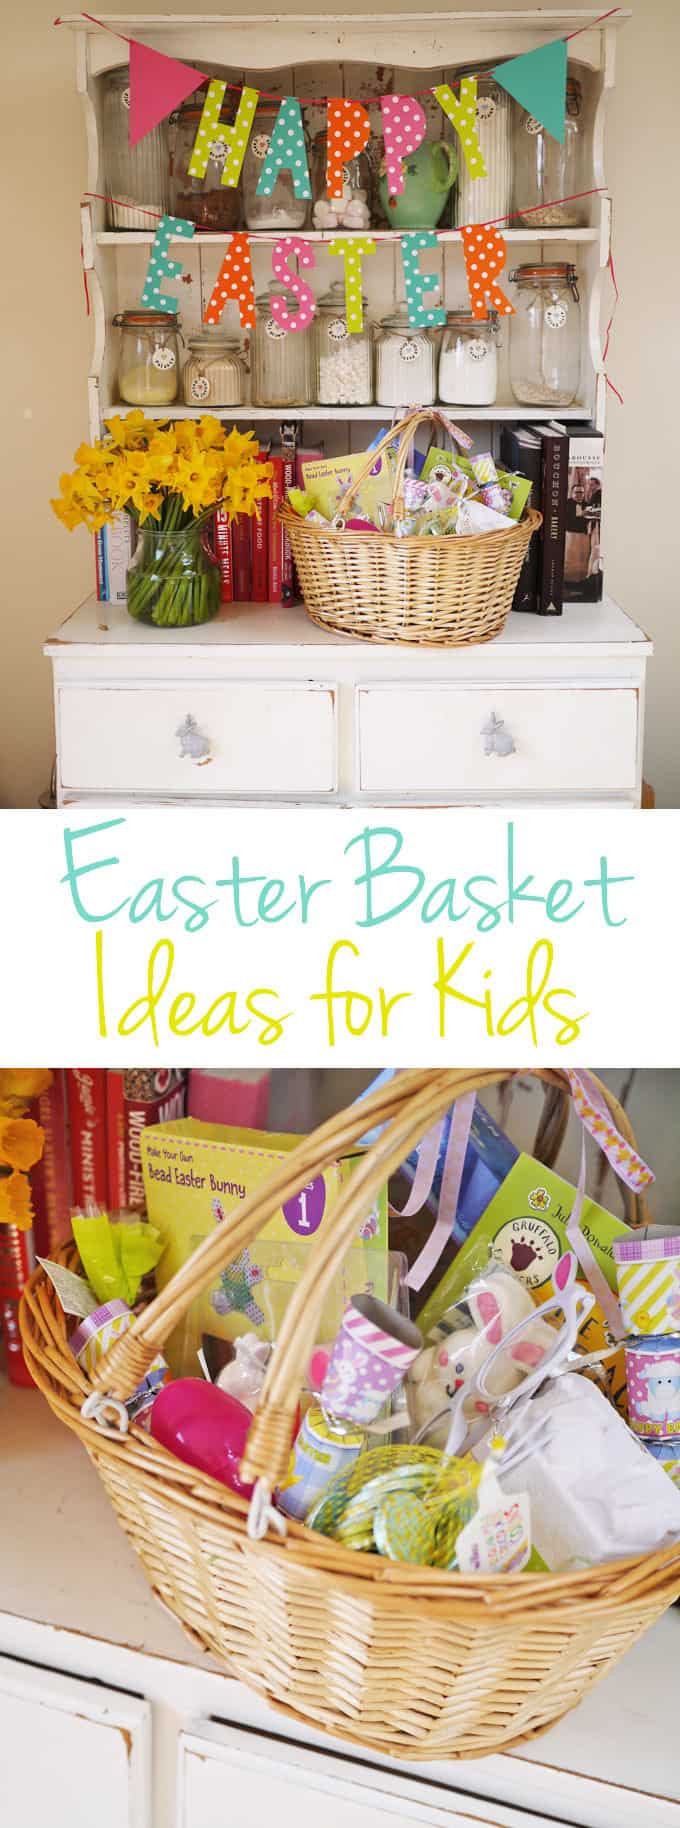 Ideas For Kids Easter Baskets
 Easter Basket Ideas for Kids Taming Twins